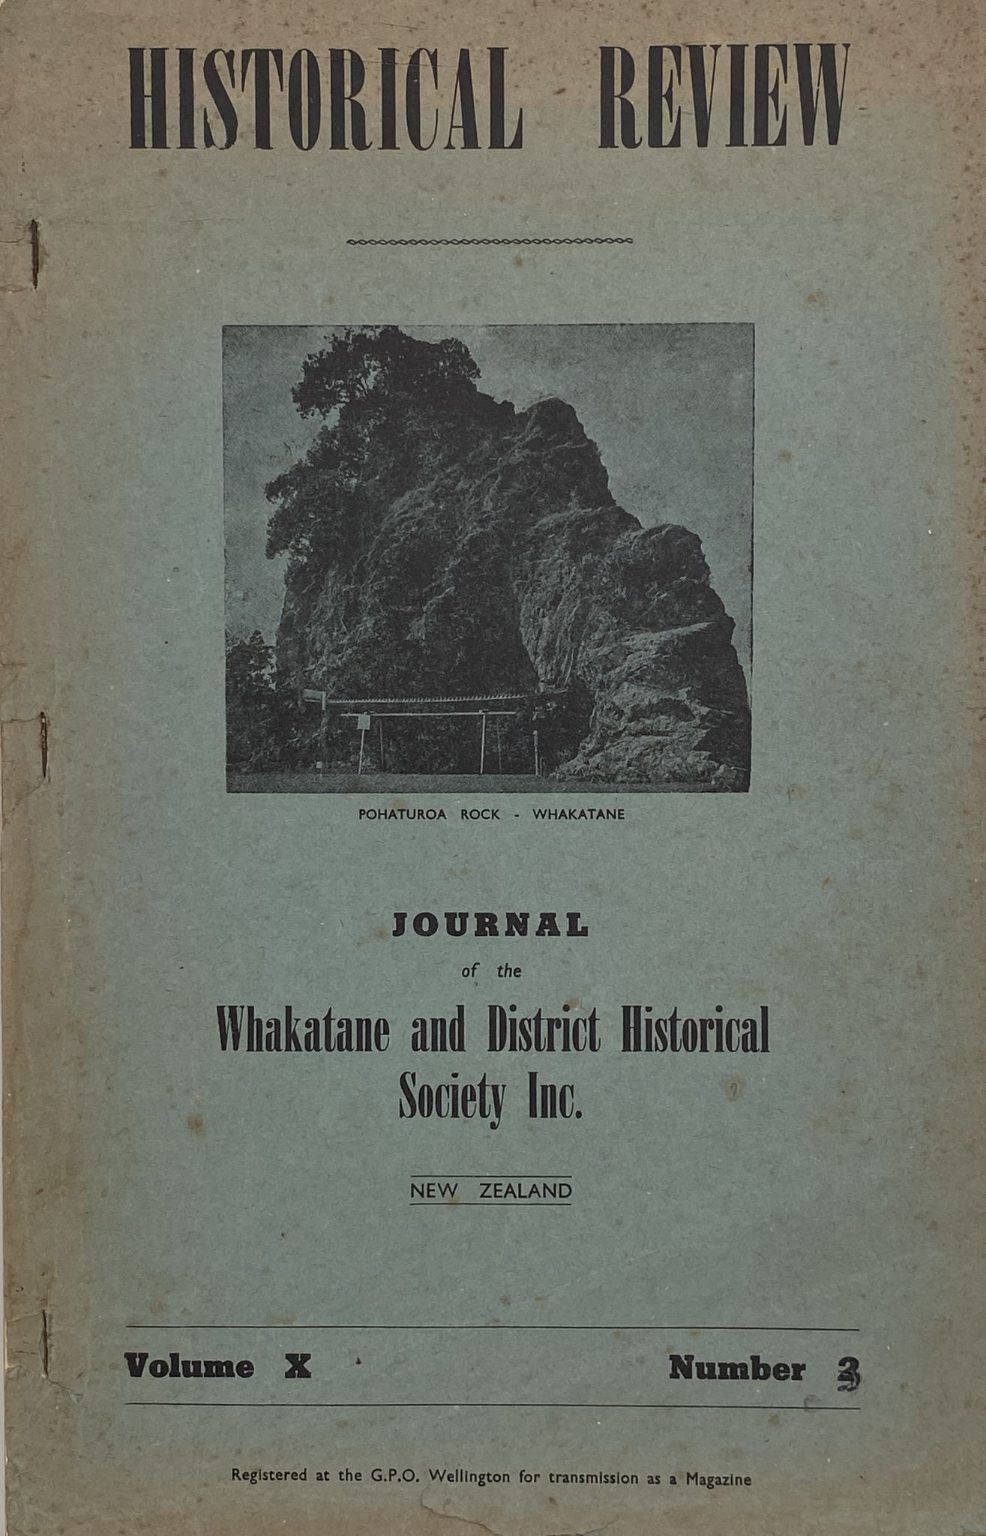 HISTORICAL REVIEW: Whakatane and District Historical Society - Vol. X, Number 2